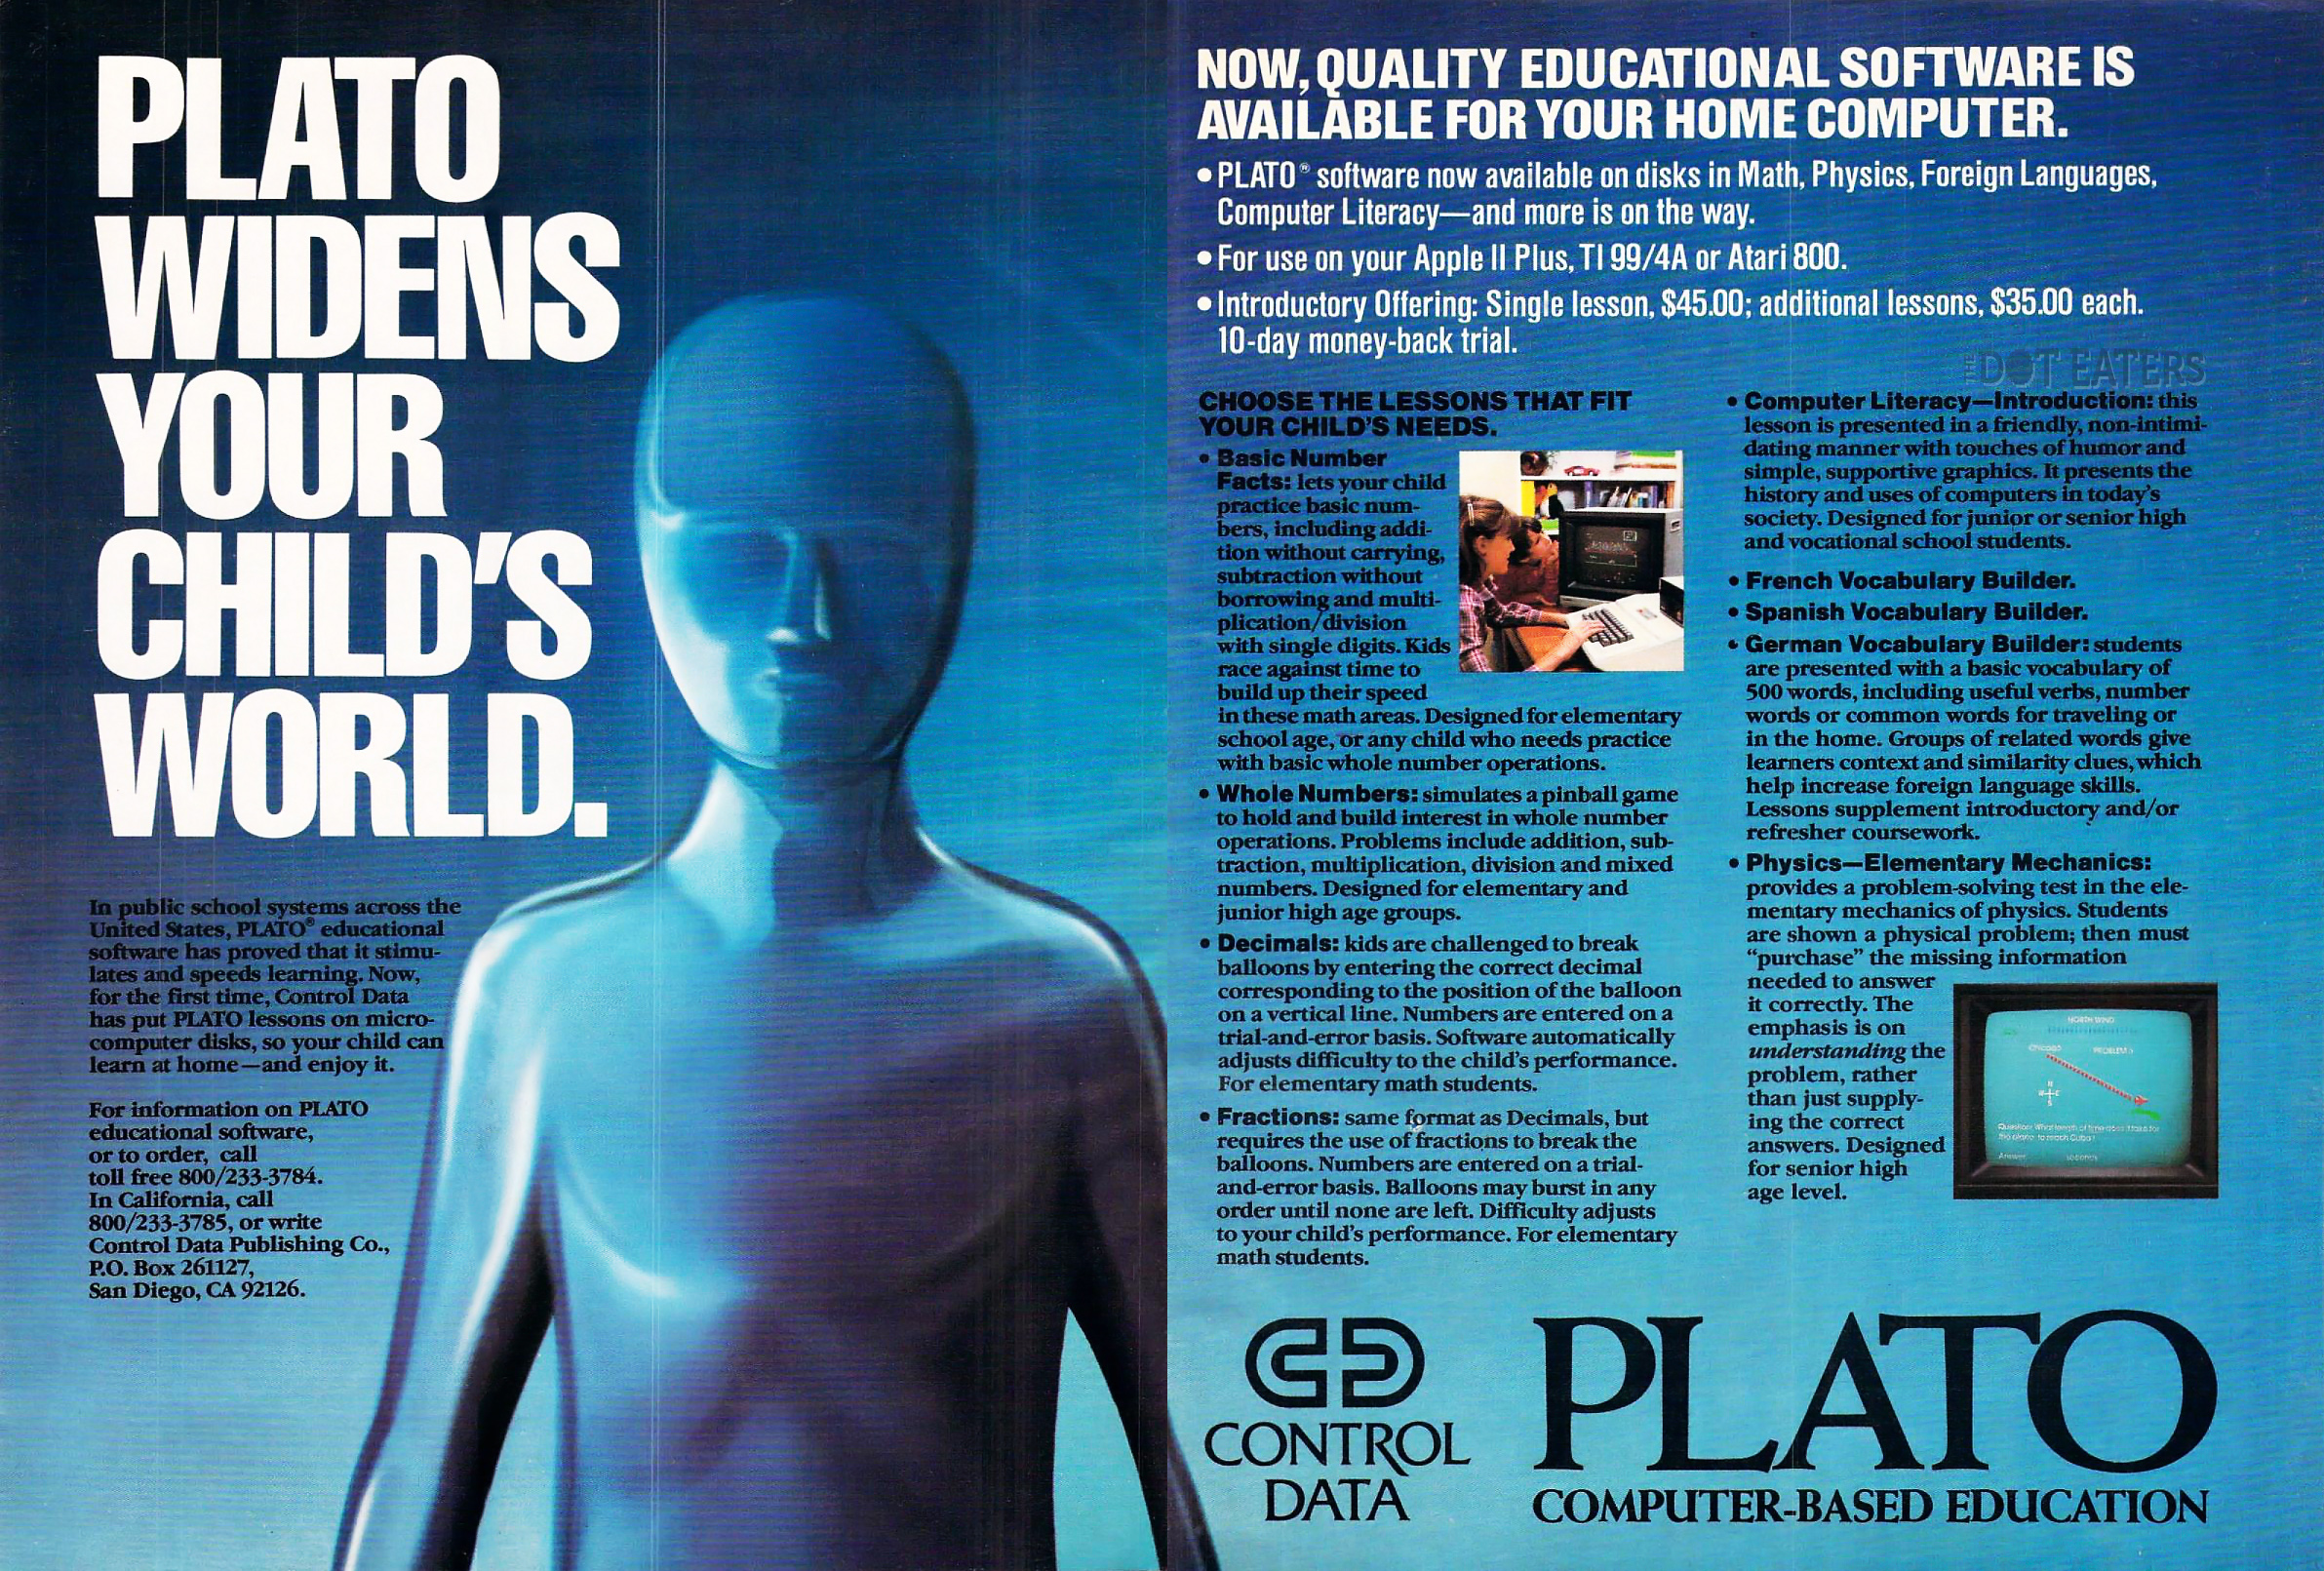 Ad for PLATO, computer-based educational system by Control Data Corp., 1982